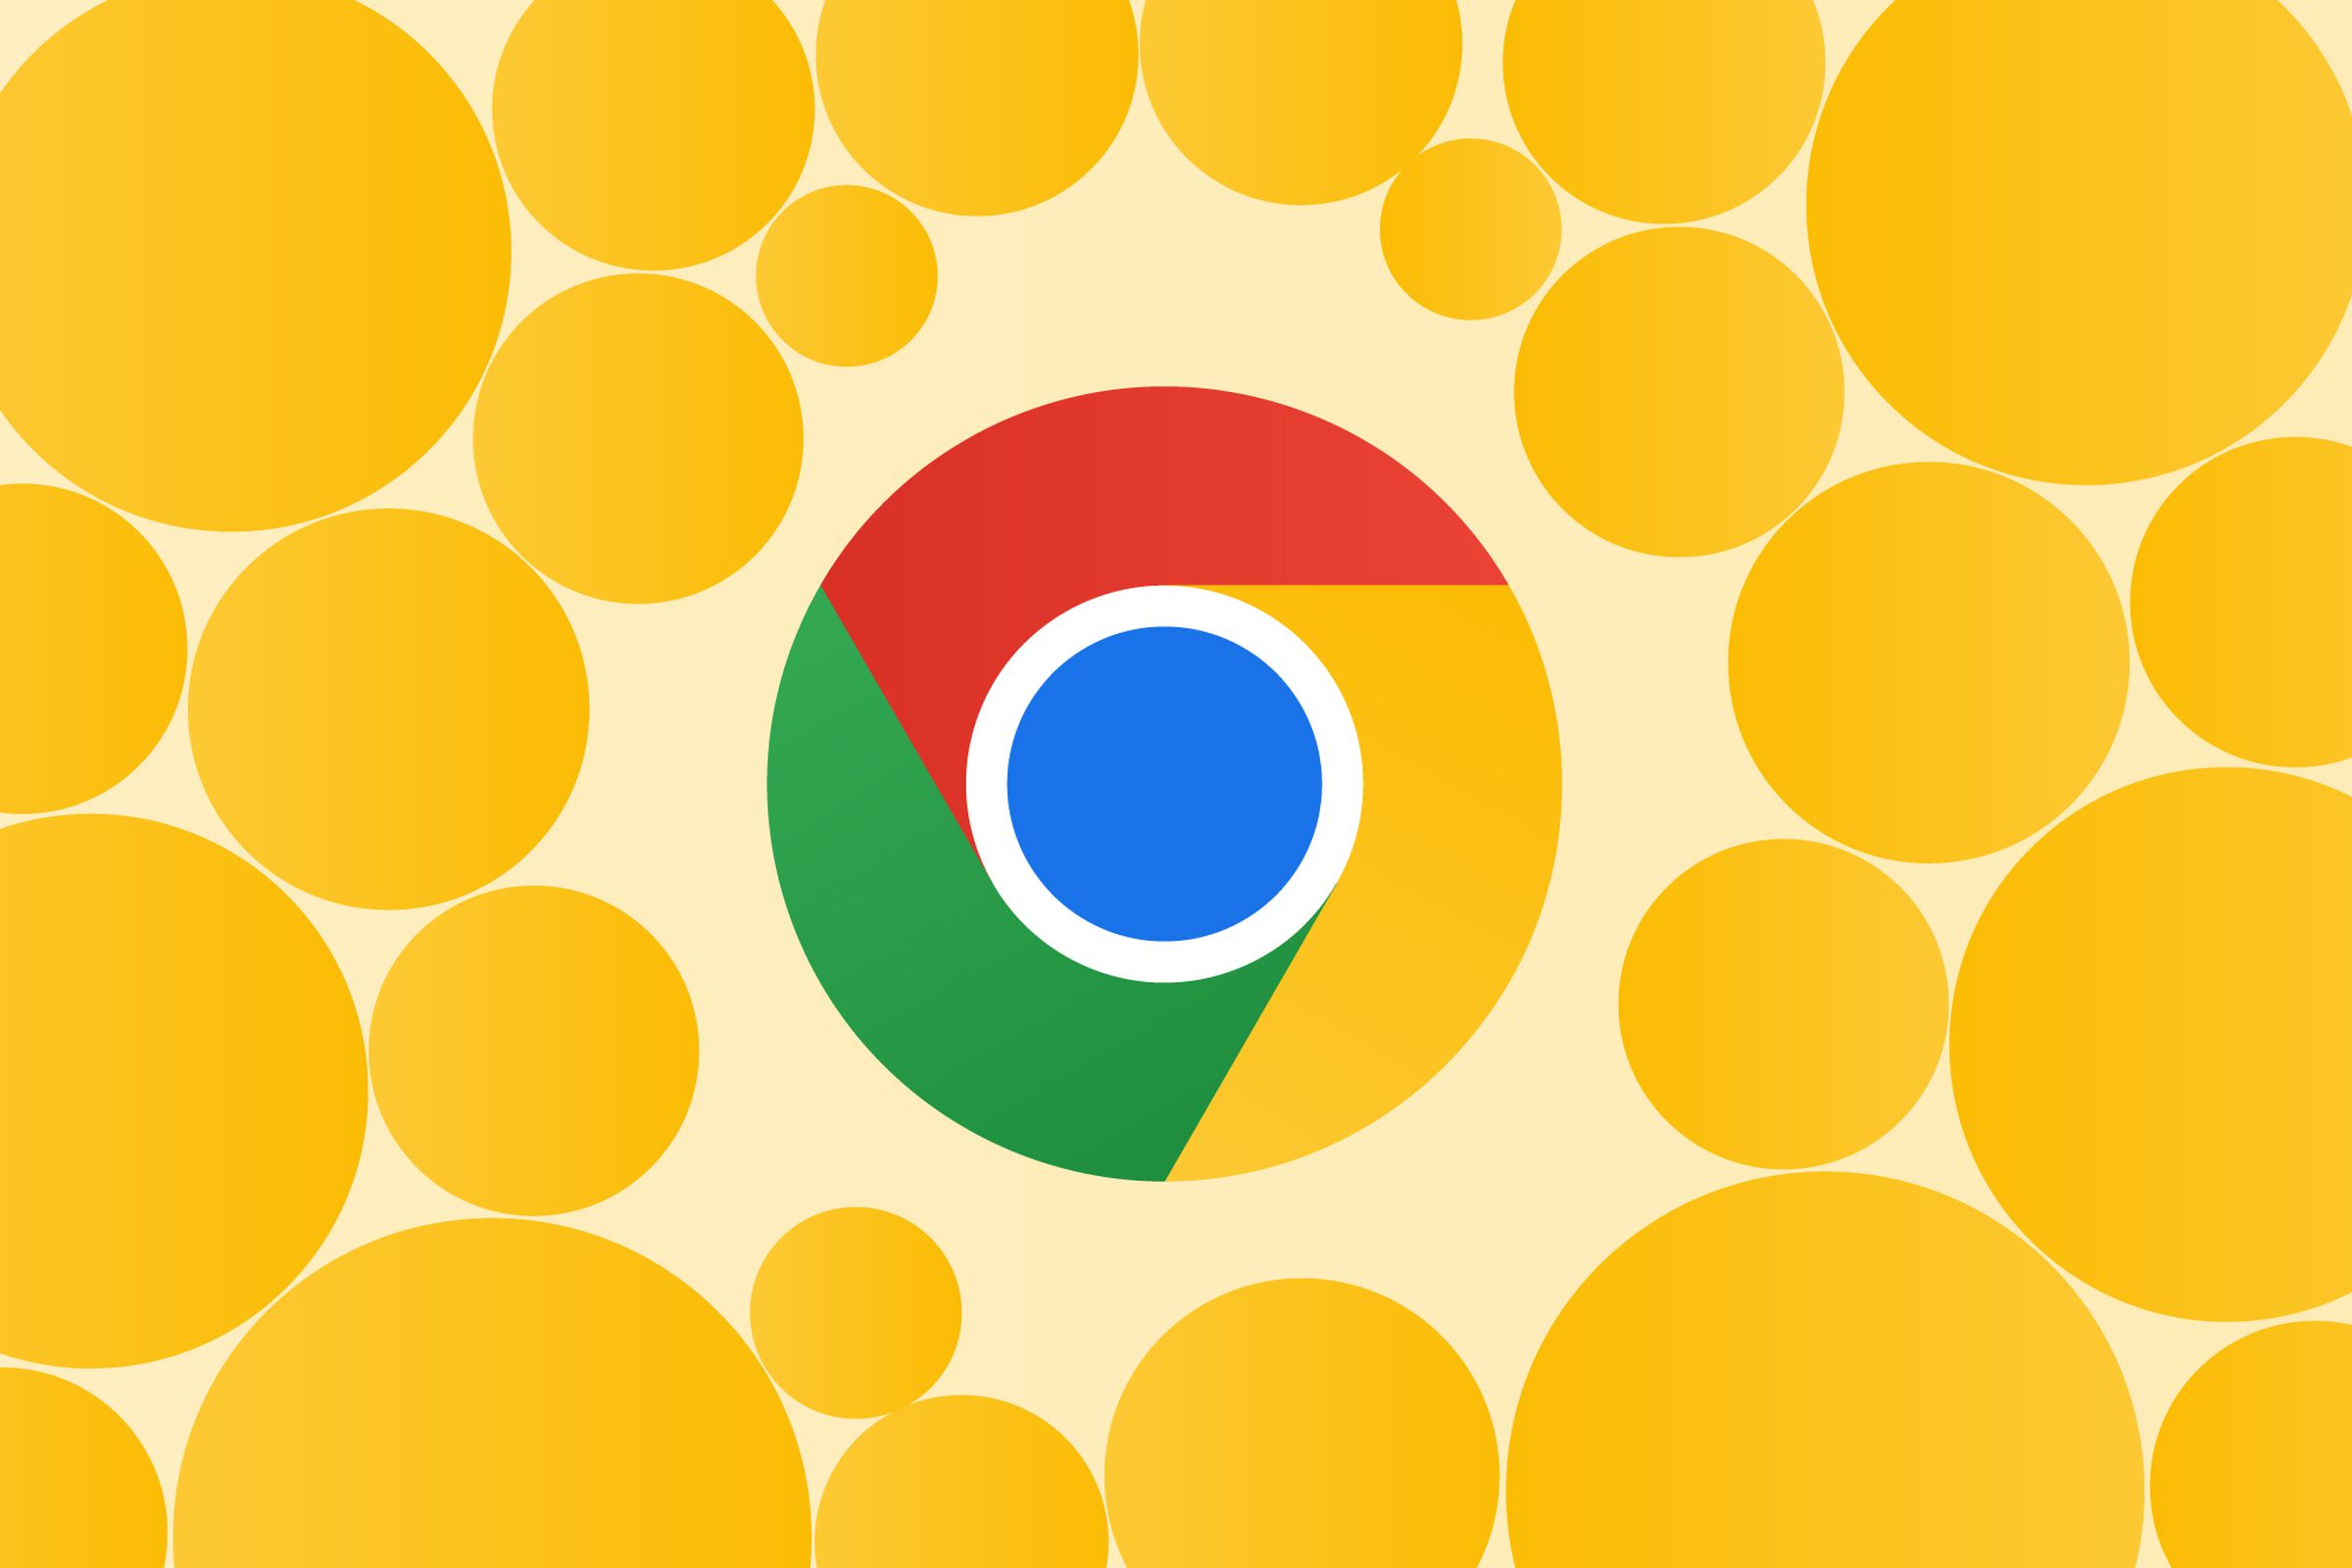 An image showing the Chrome logo surrounded by yellow circles